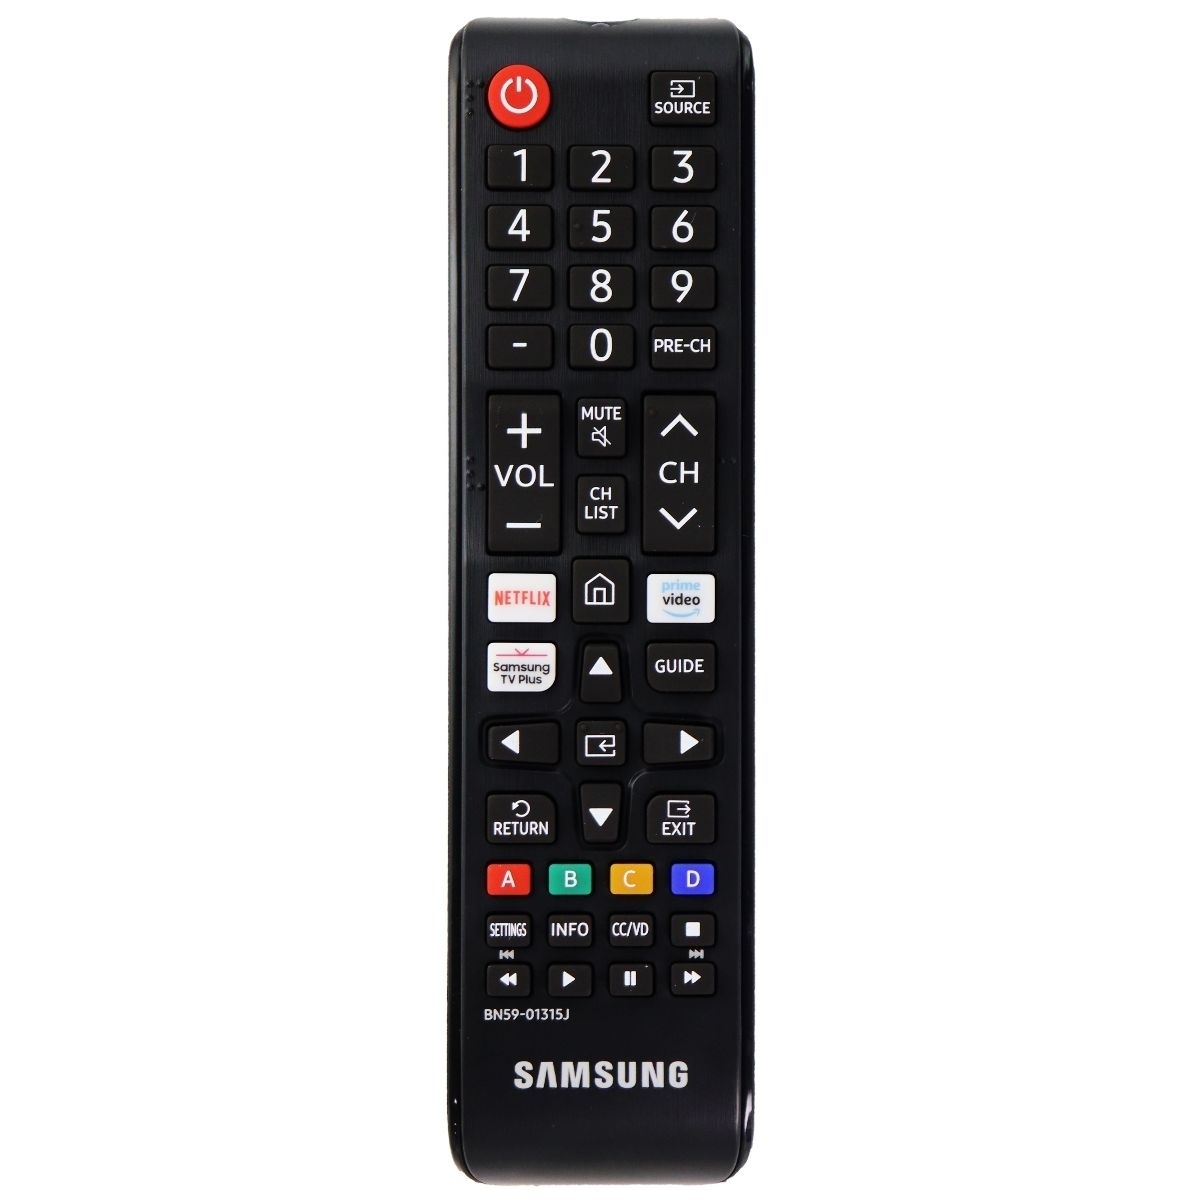 Samsung Remote Control (BN59-01315J) With Netflix Hotkey For Select TVs - Black